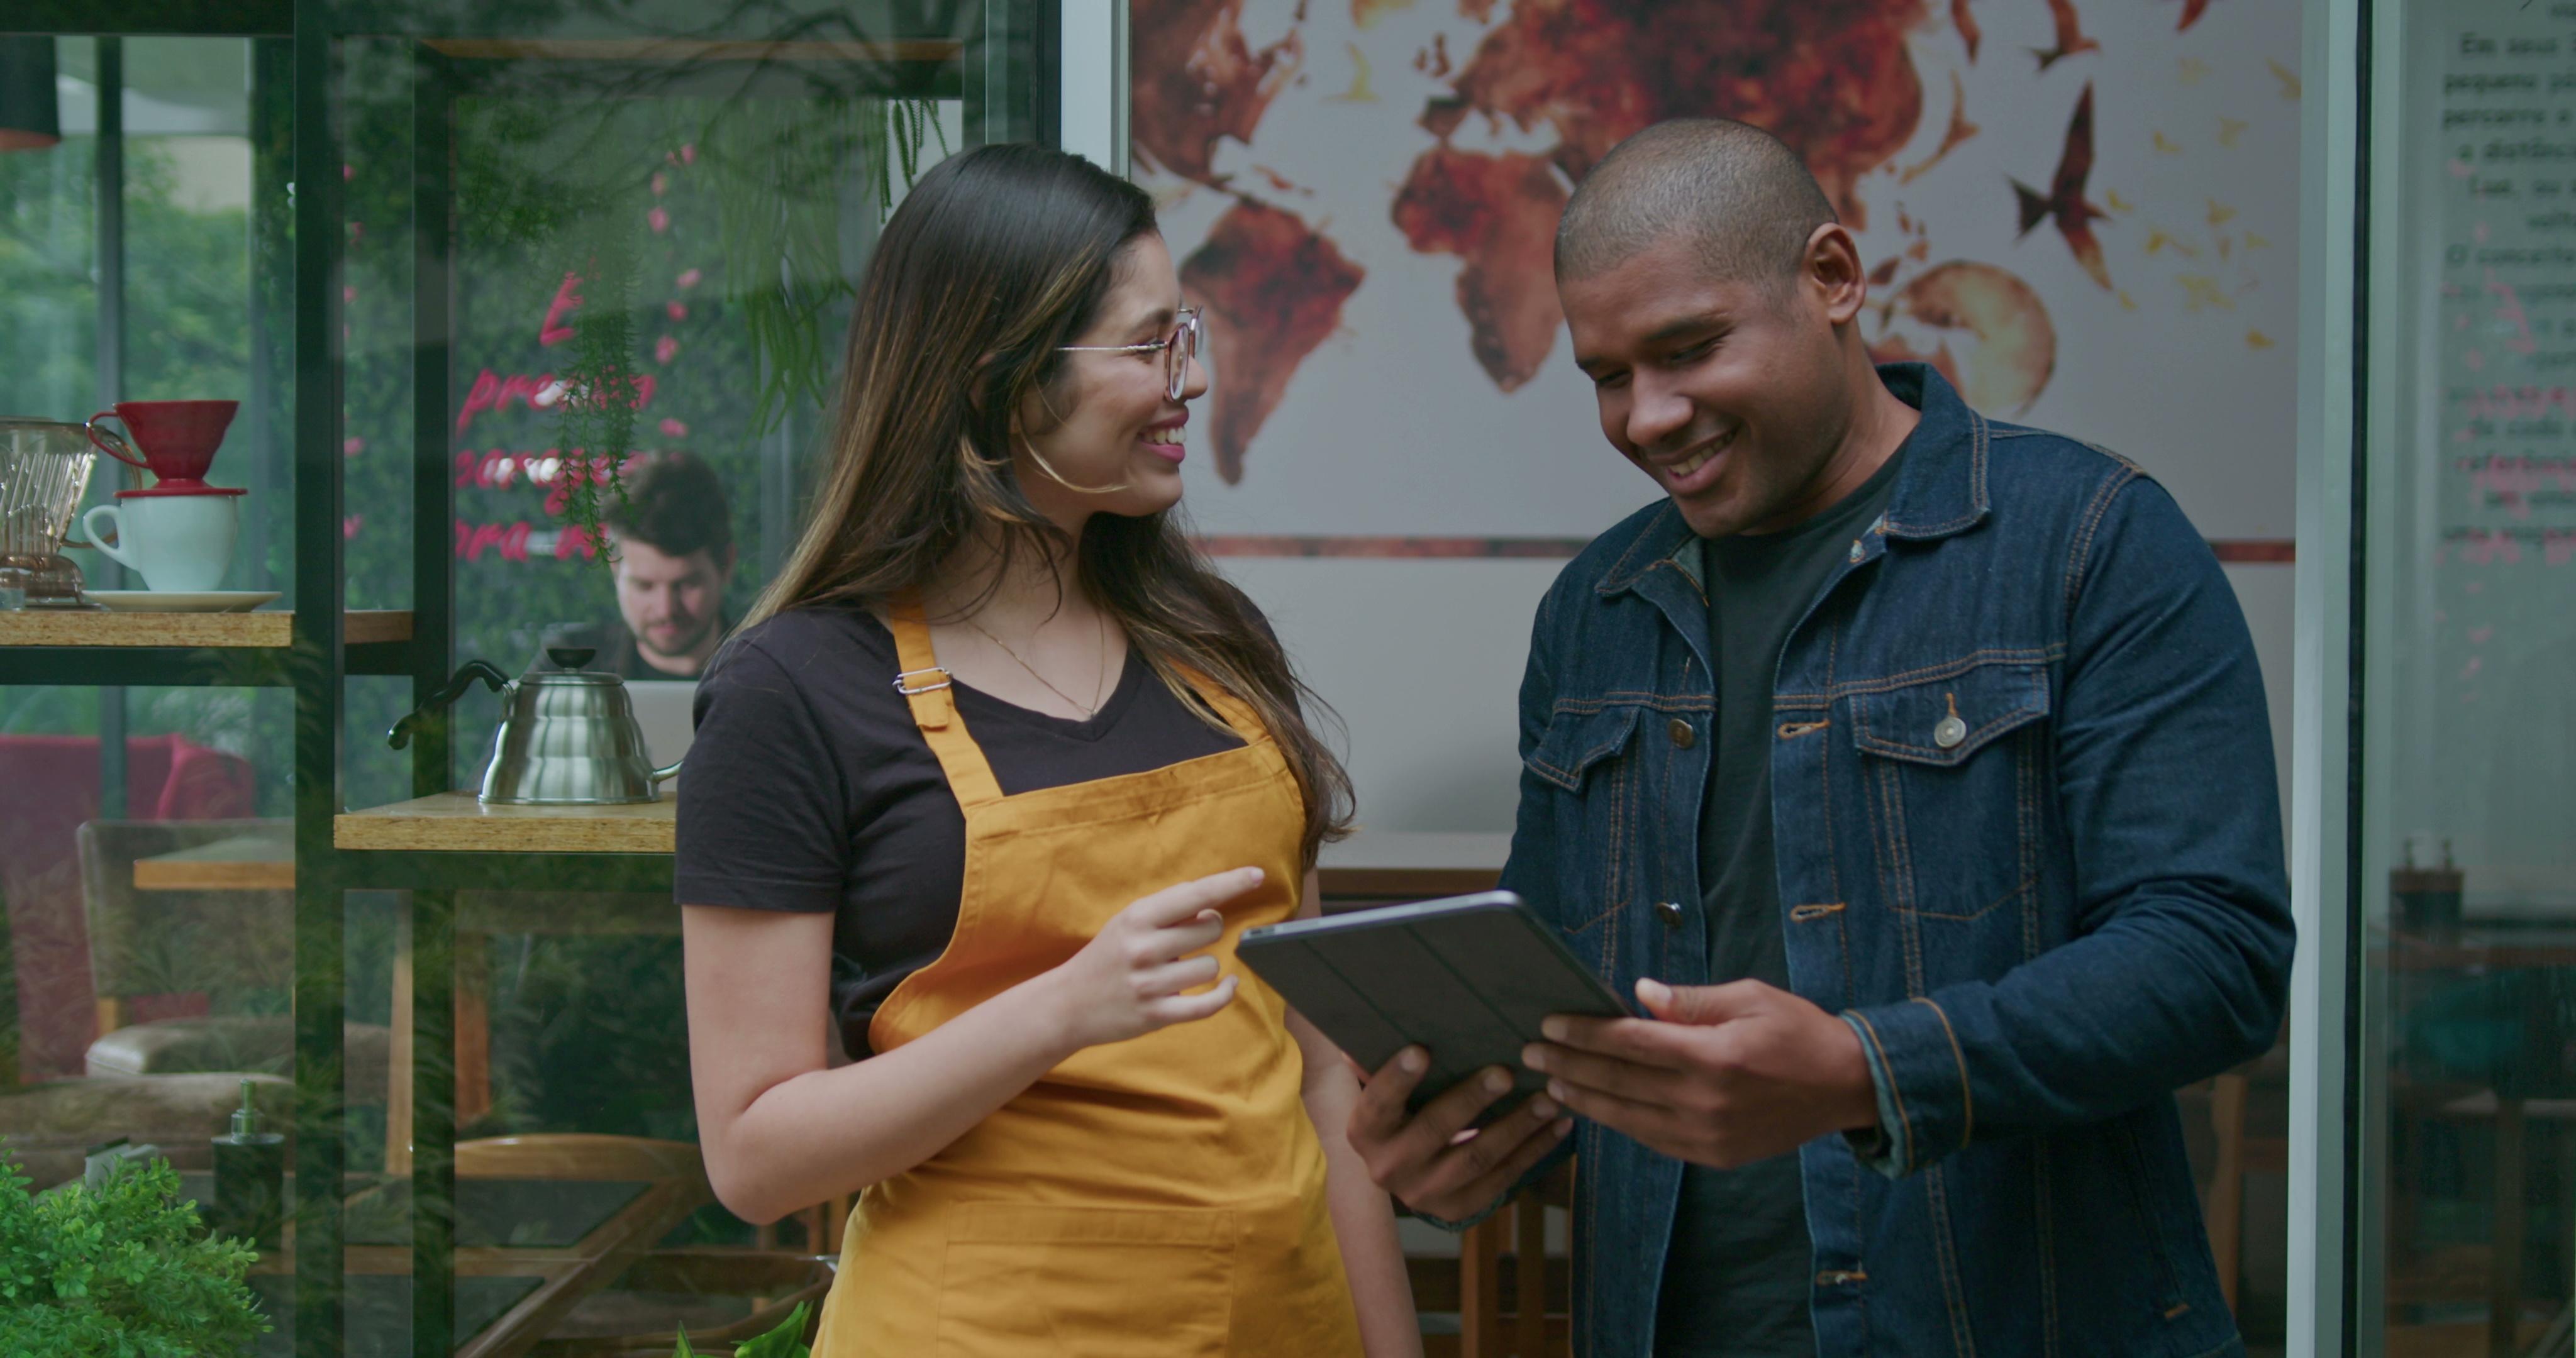 Woman with apron talking with man with tablet